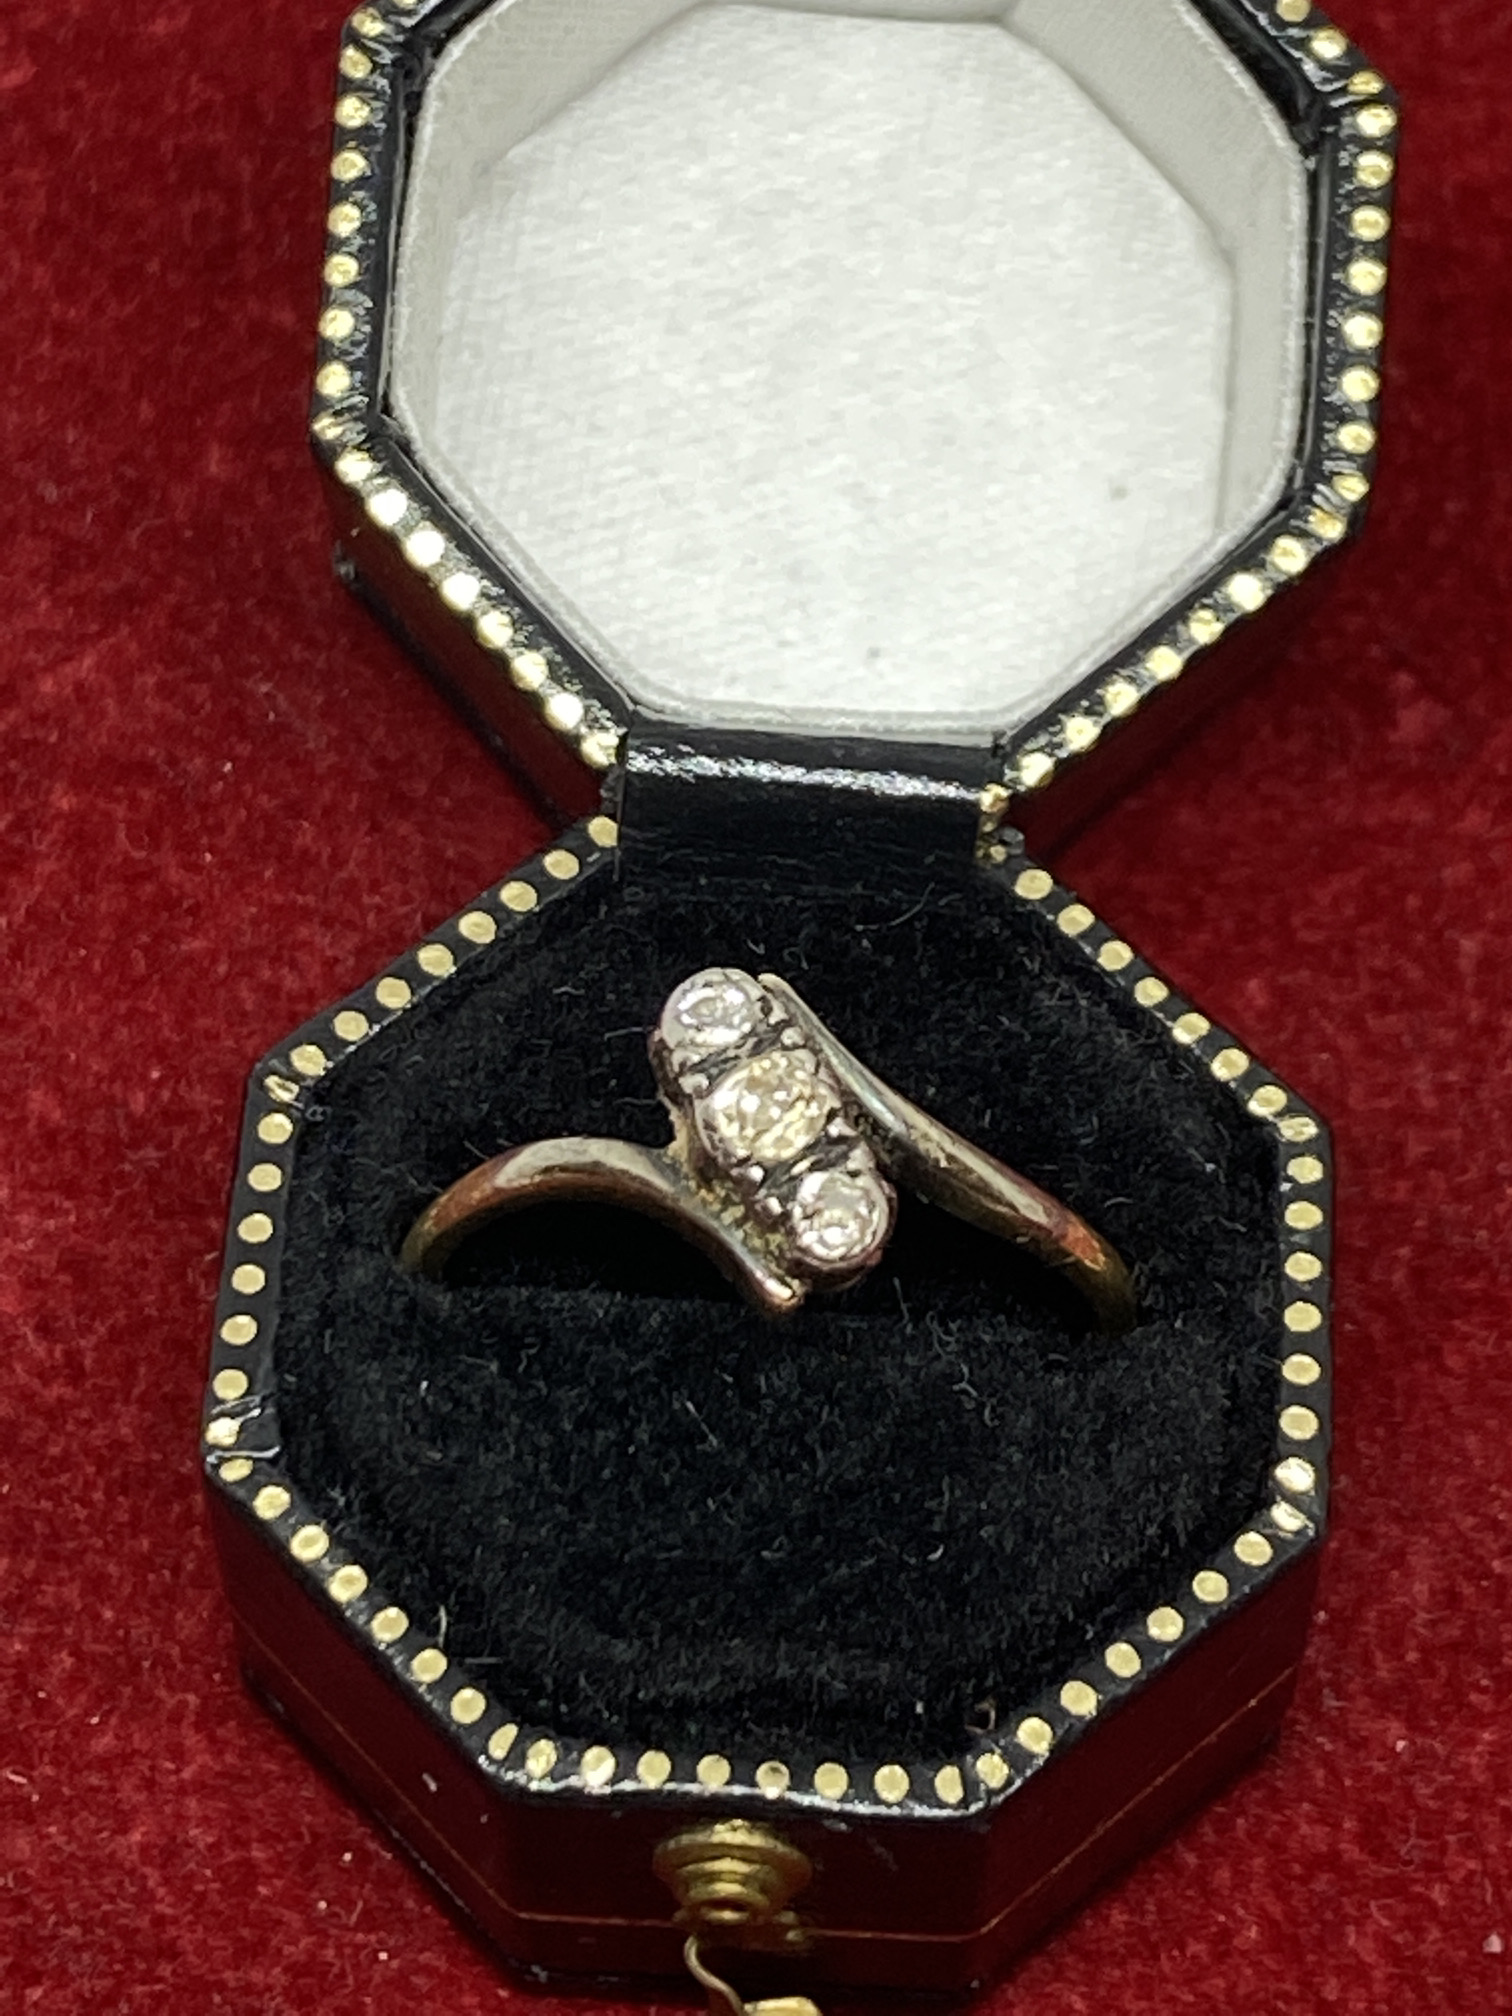 ANTIQUE 18ct GOLD DIAMOND RING IN VINTAGE BOX